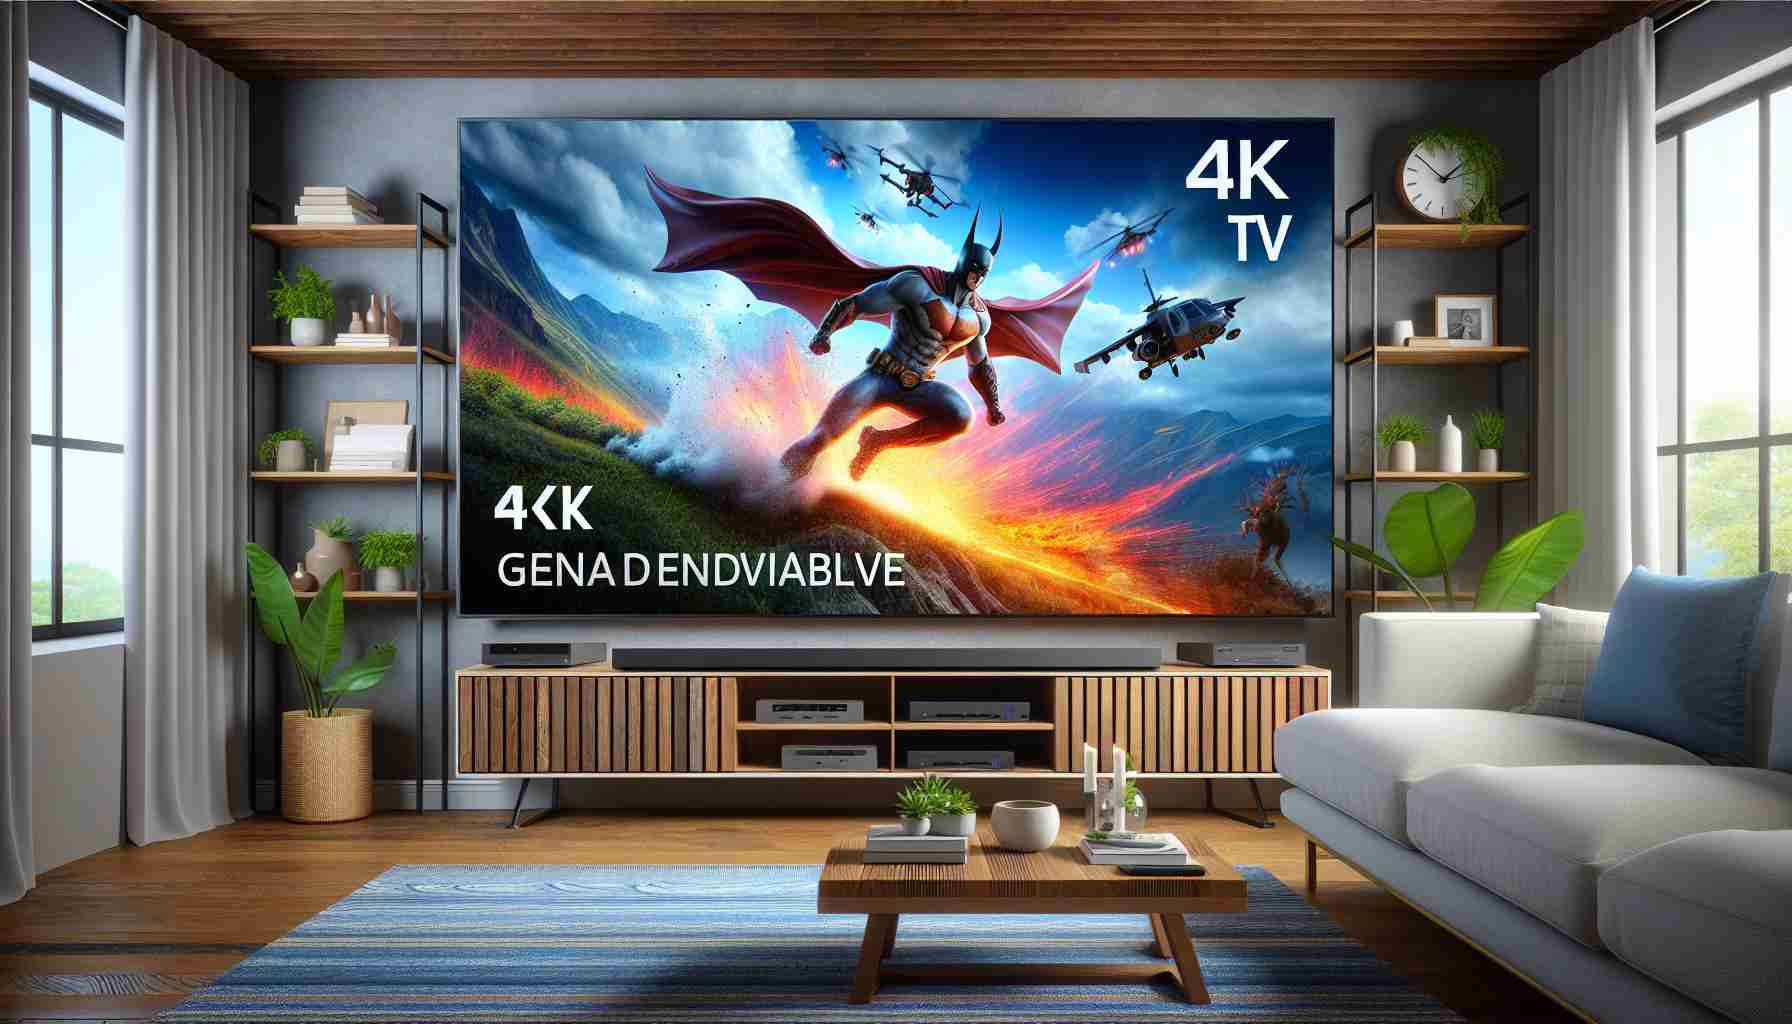 Enhance Your Home Viewing Experience with Samsung’s Affordable 65-Inch 4K TV